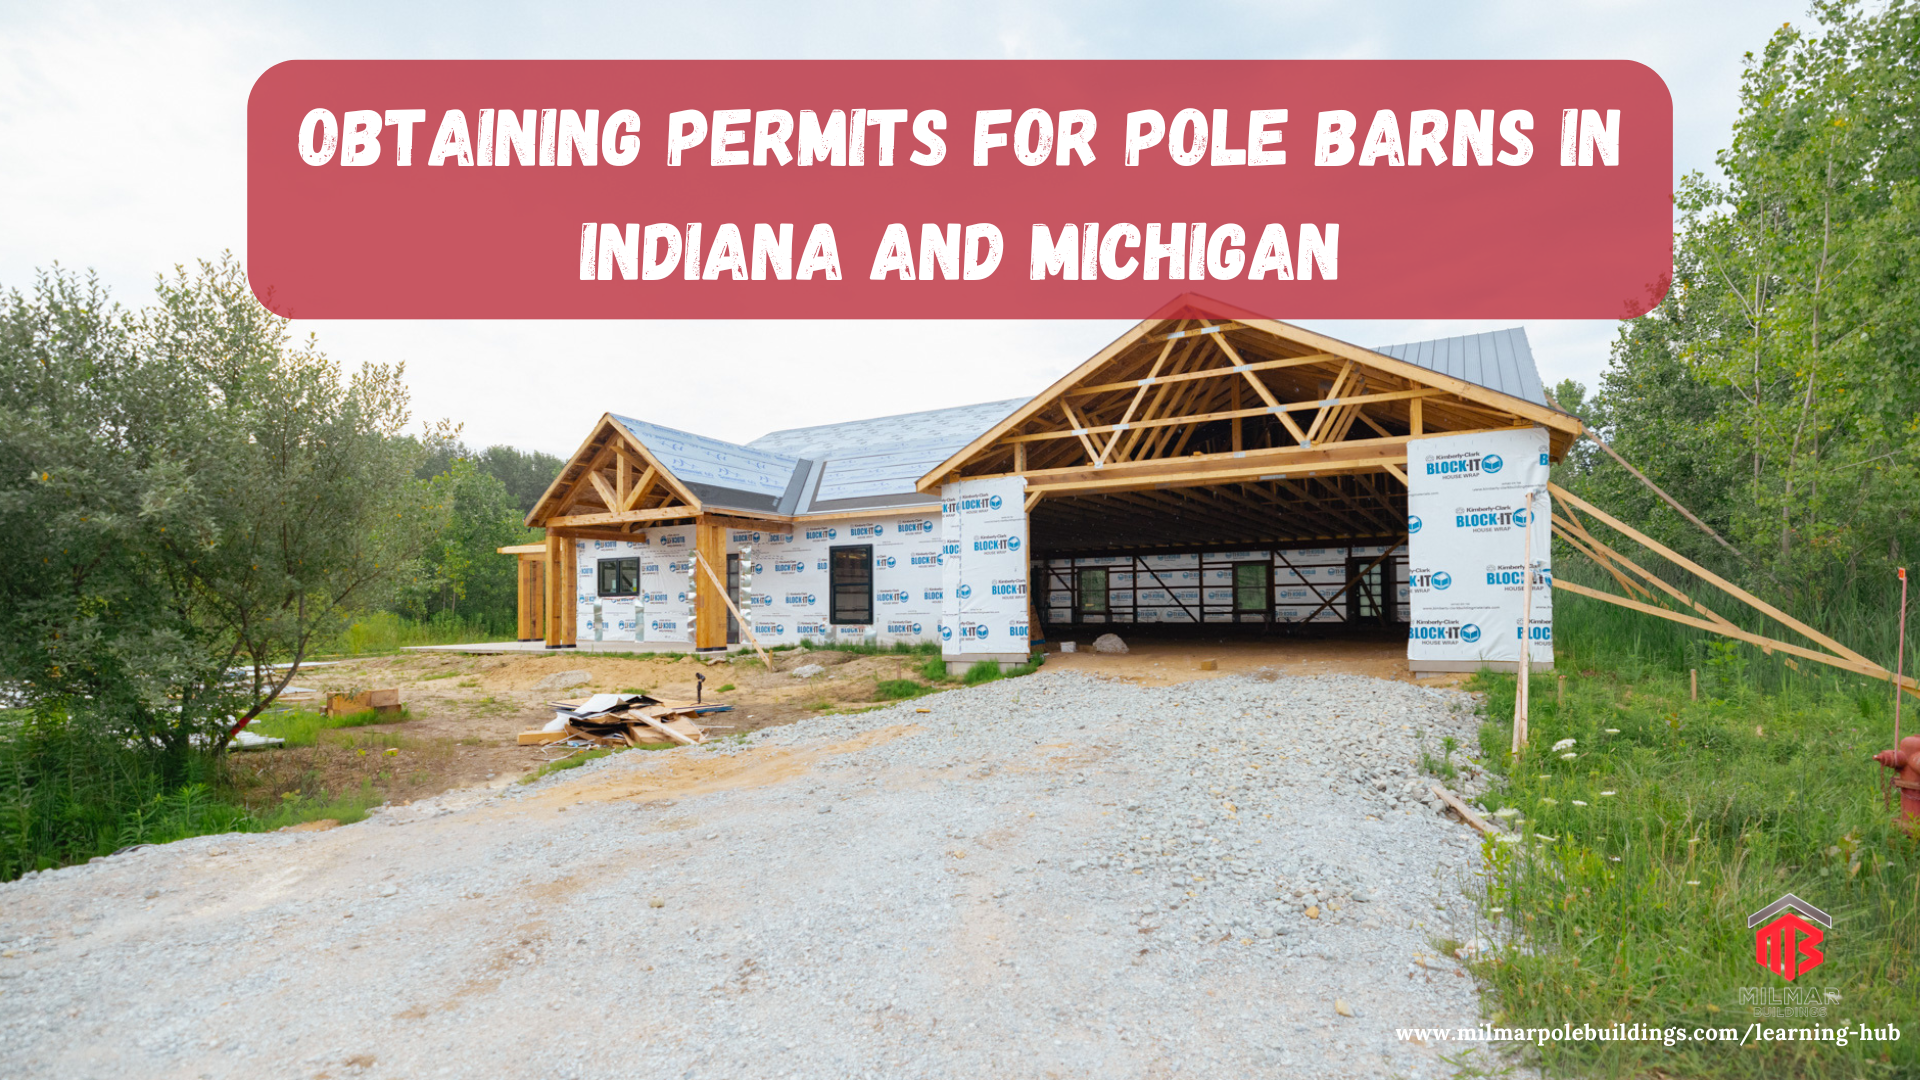 Pole Barn Permits for Indiana and Michigan? - Image